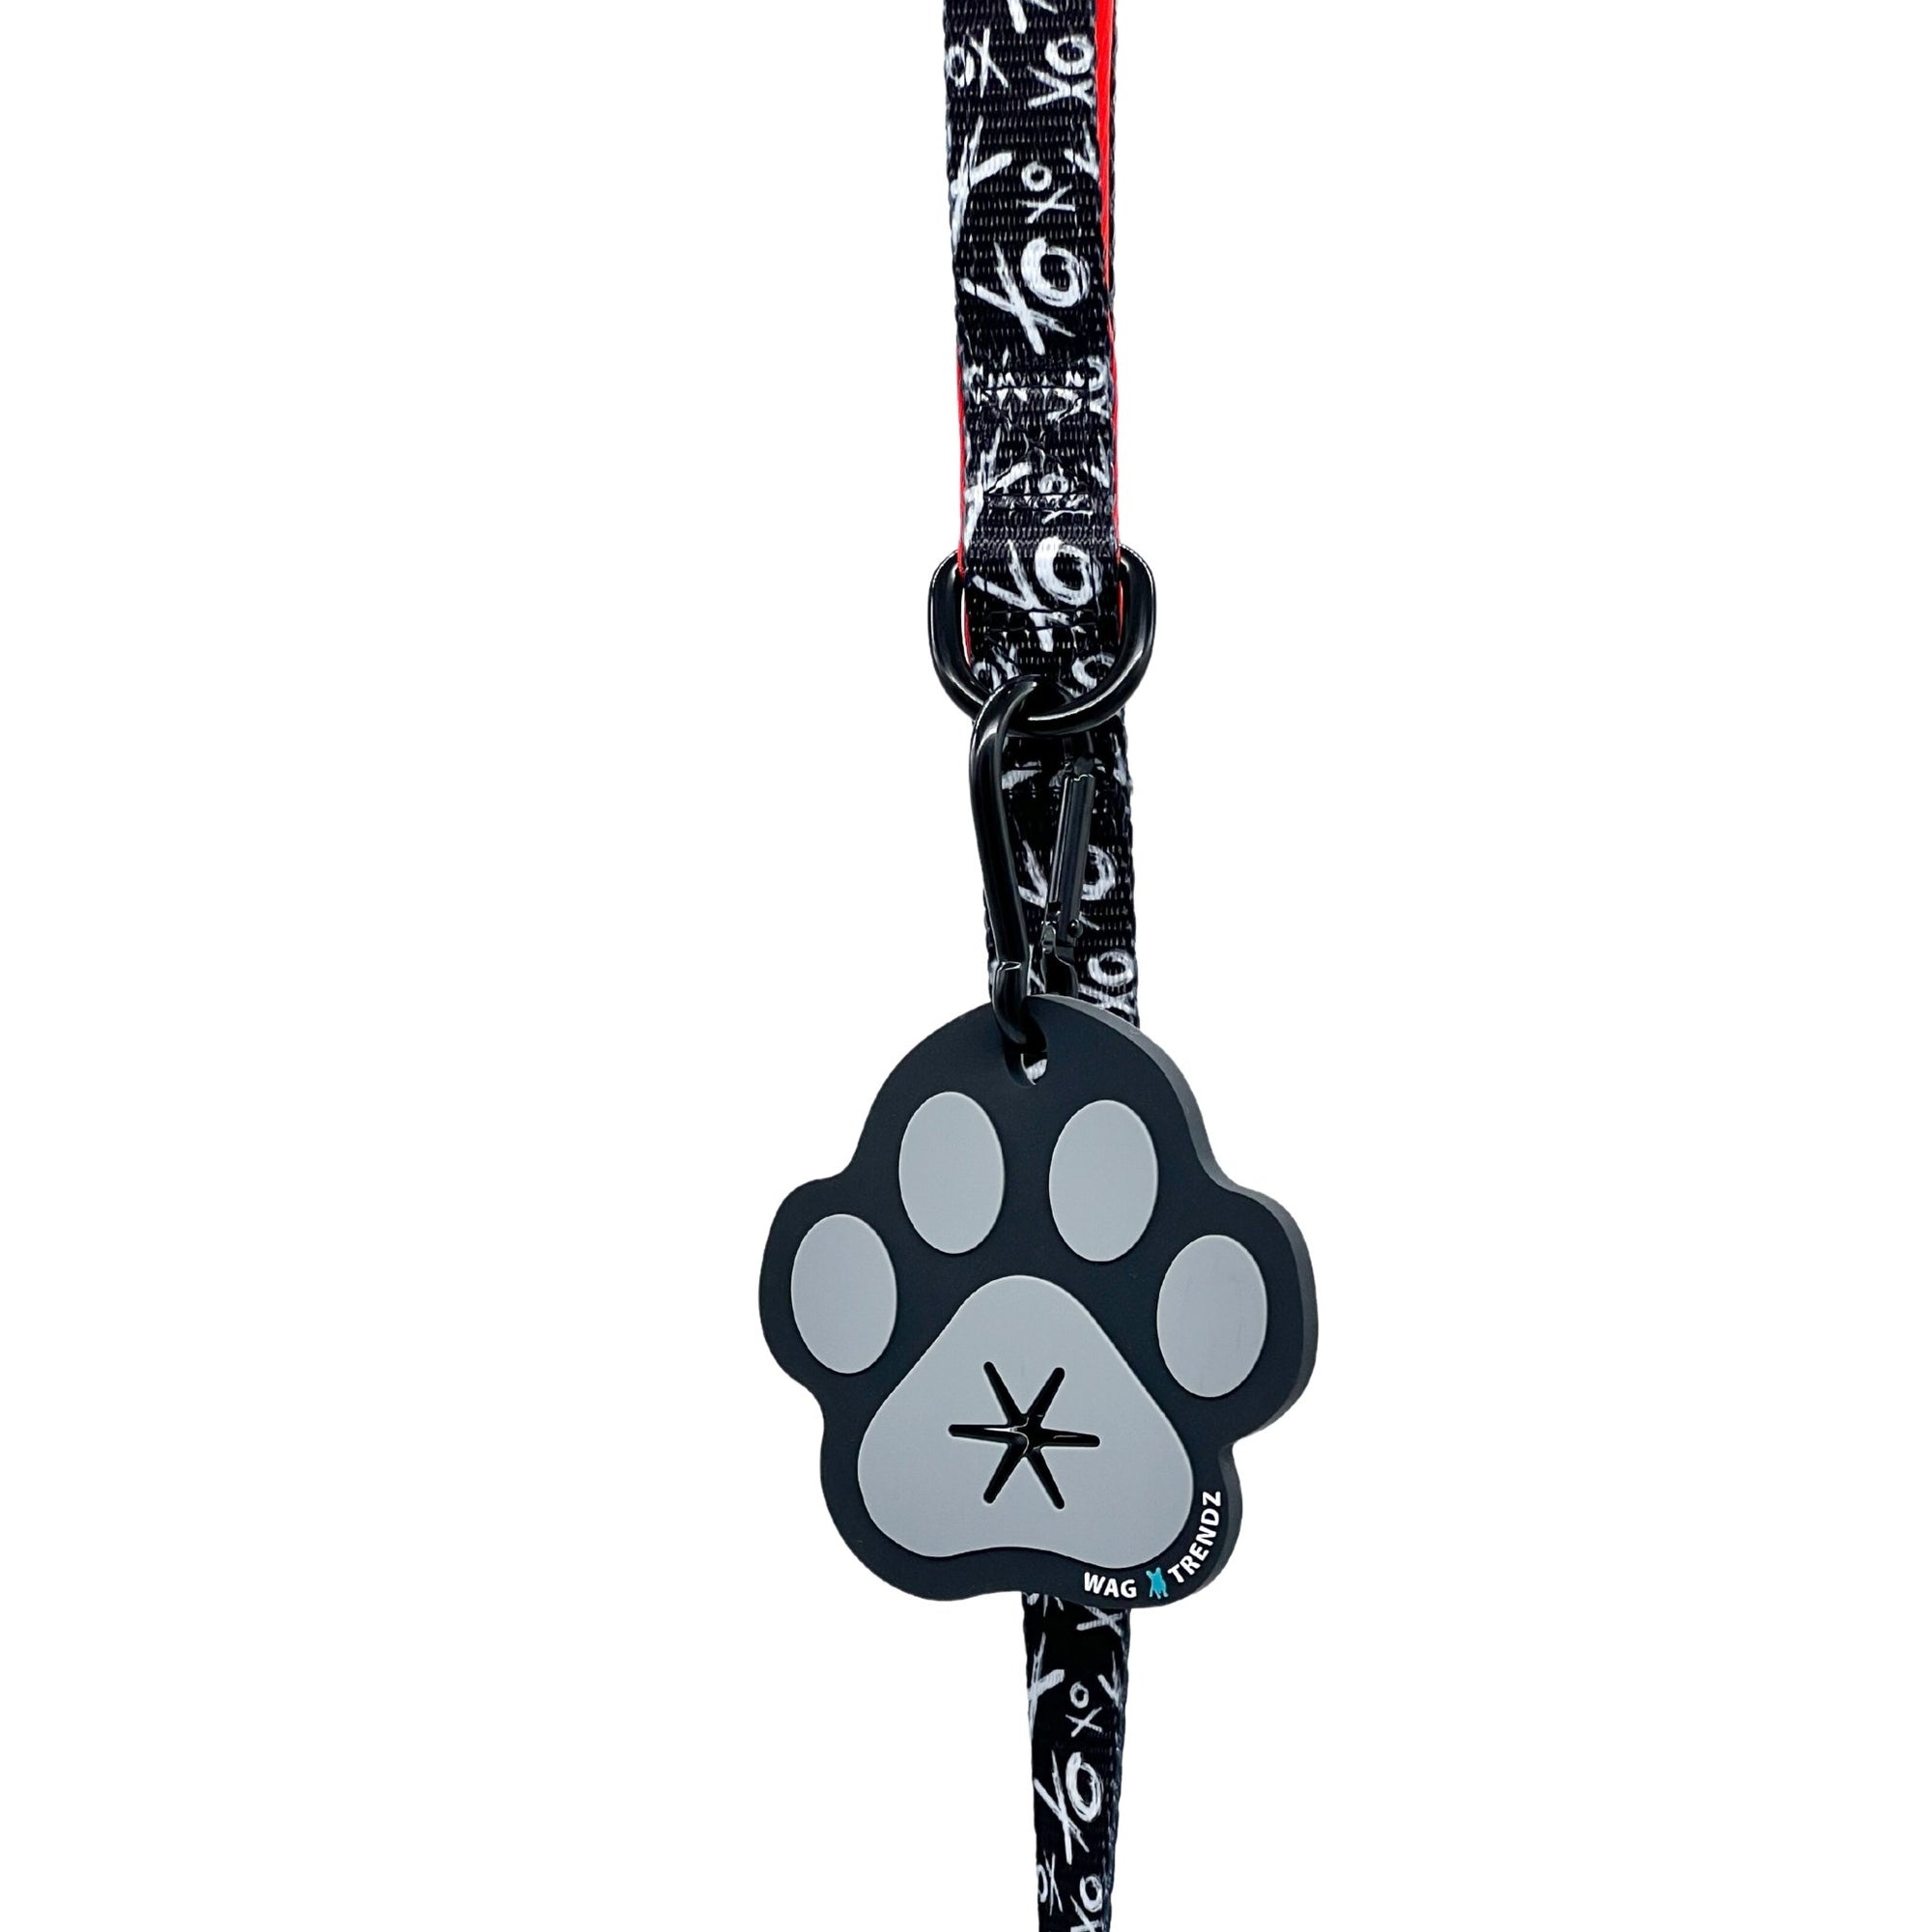 Poop Buddy - black and gray resin dog paw - hanging on a black & white XO dog leash with red accents - against white background - Wag Trendz